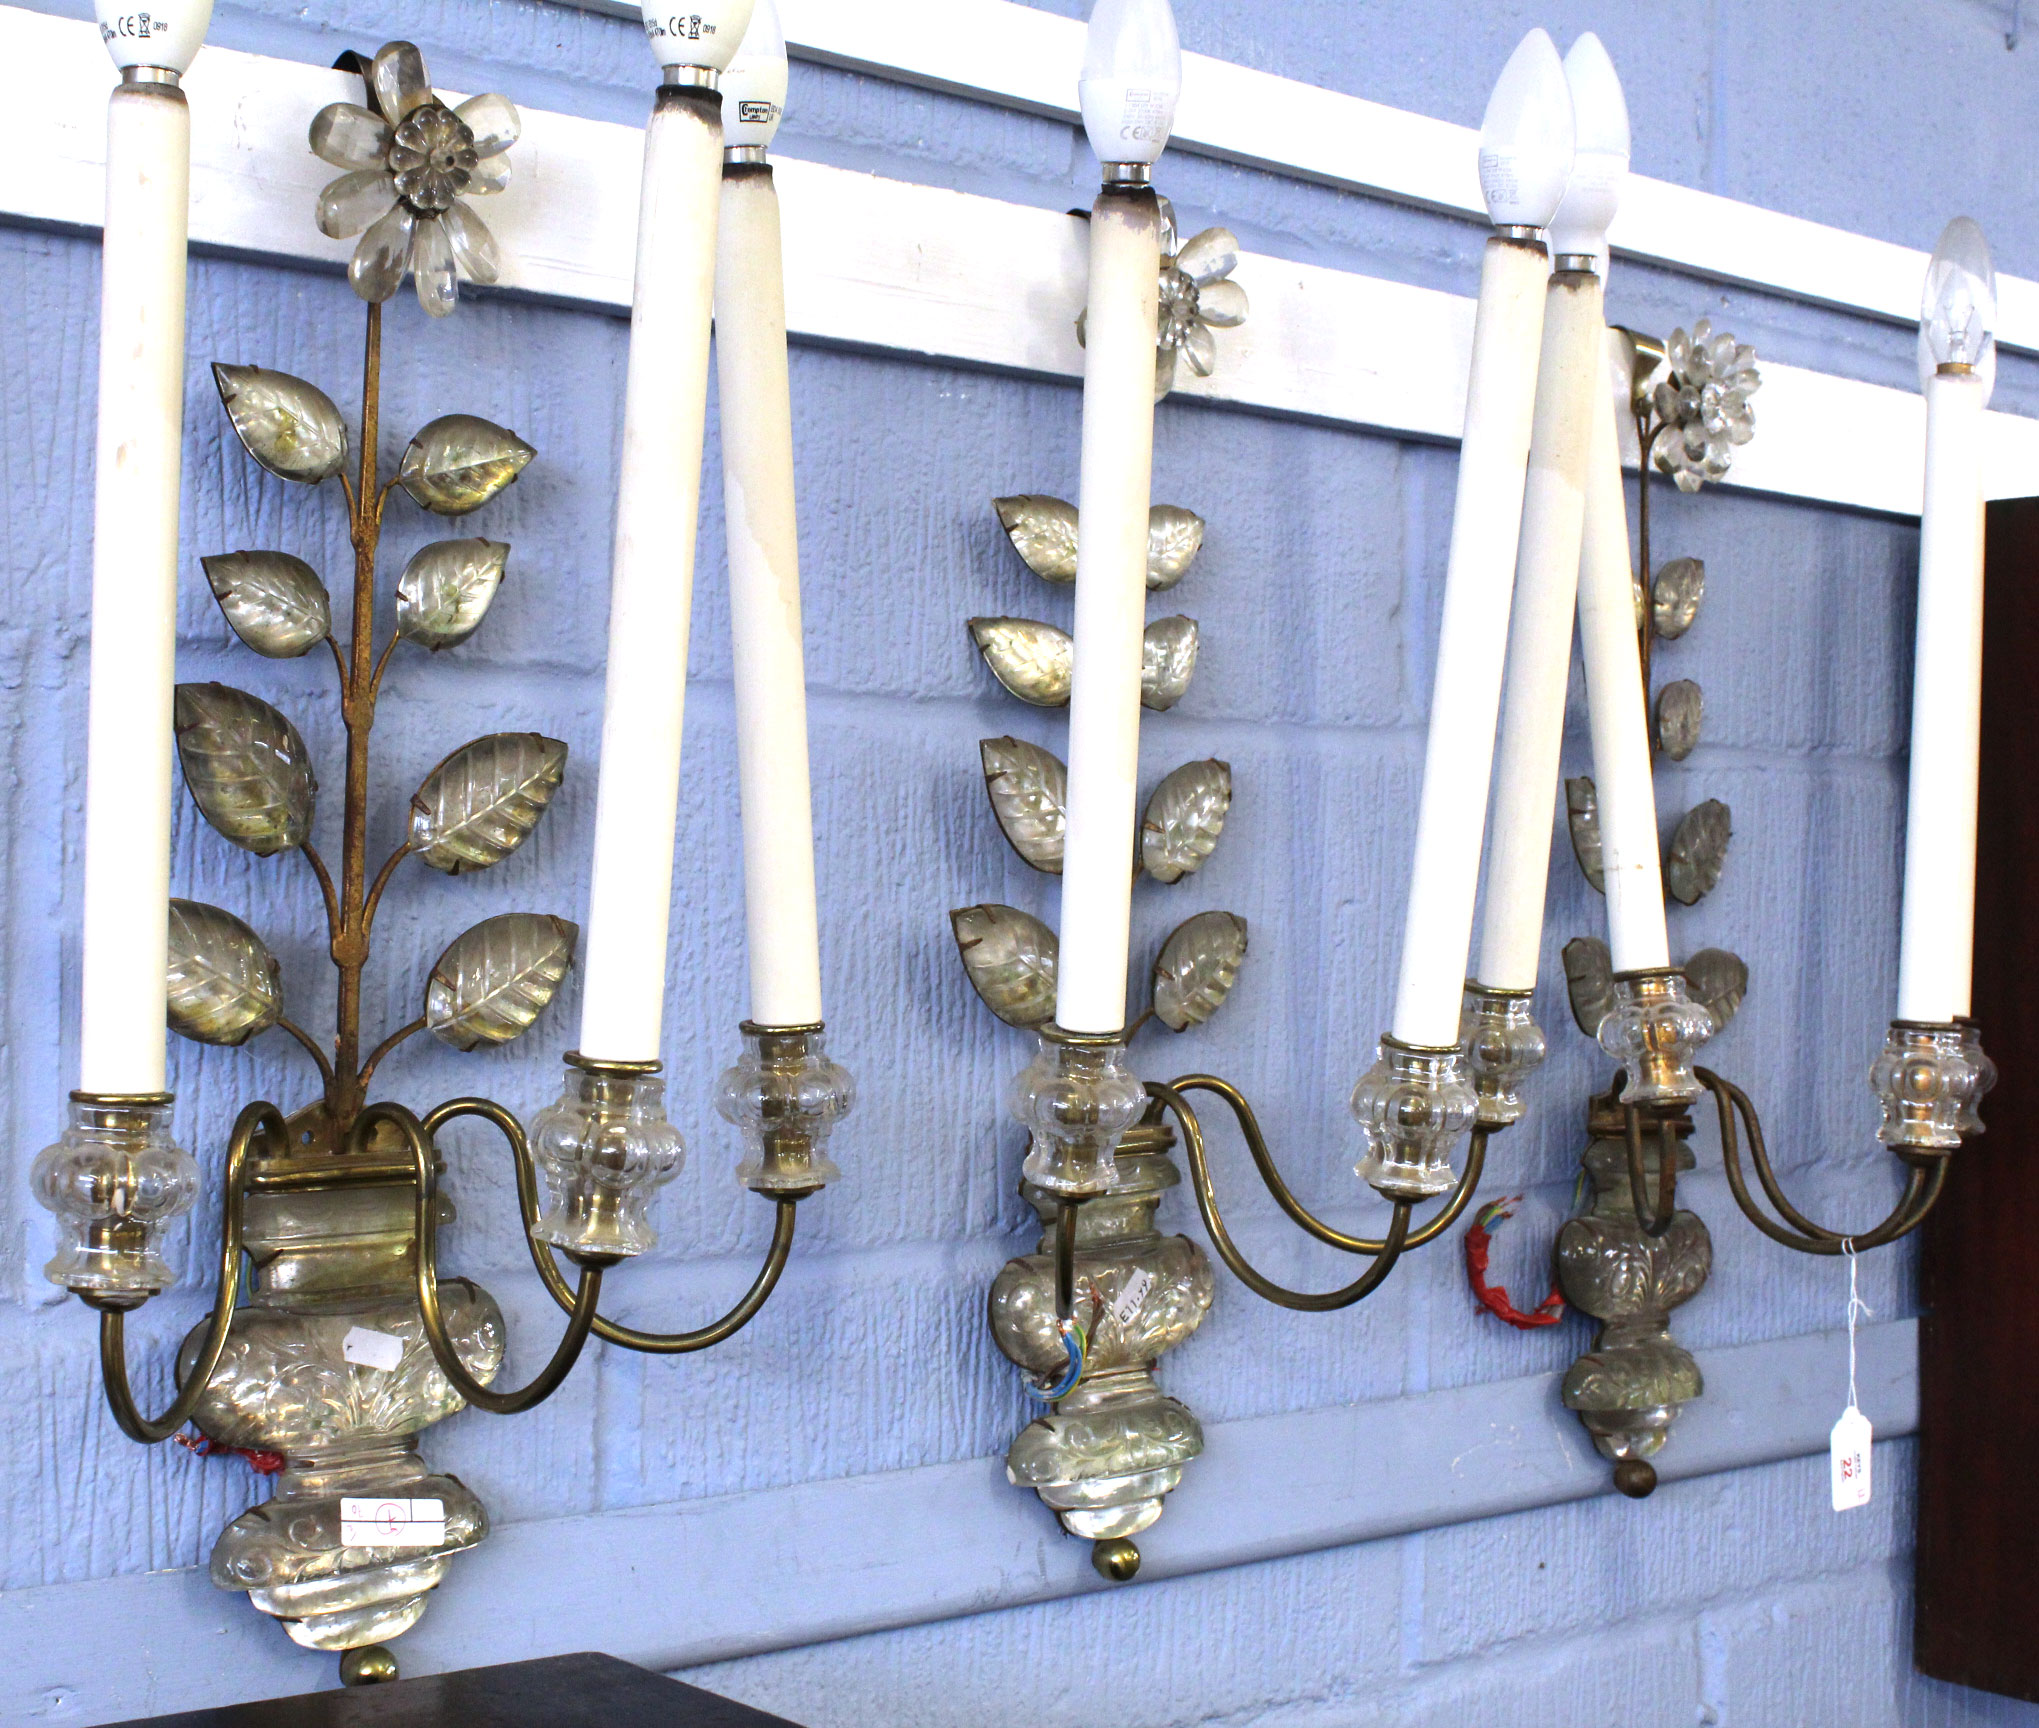 Interesting set of three metal and moulded glass light fittings in the form of flowering trees